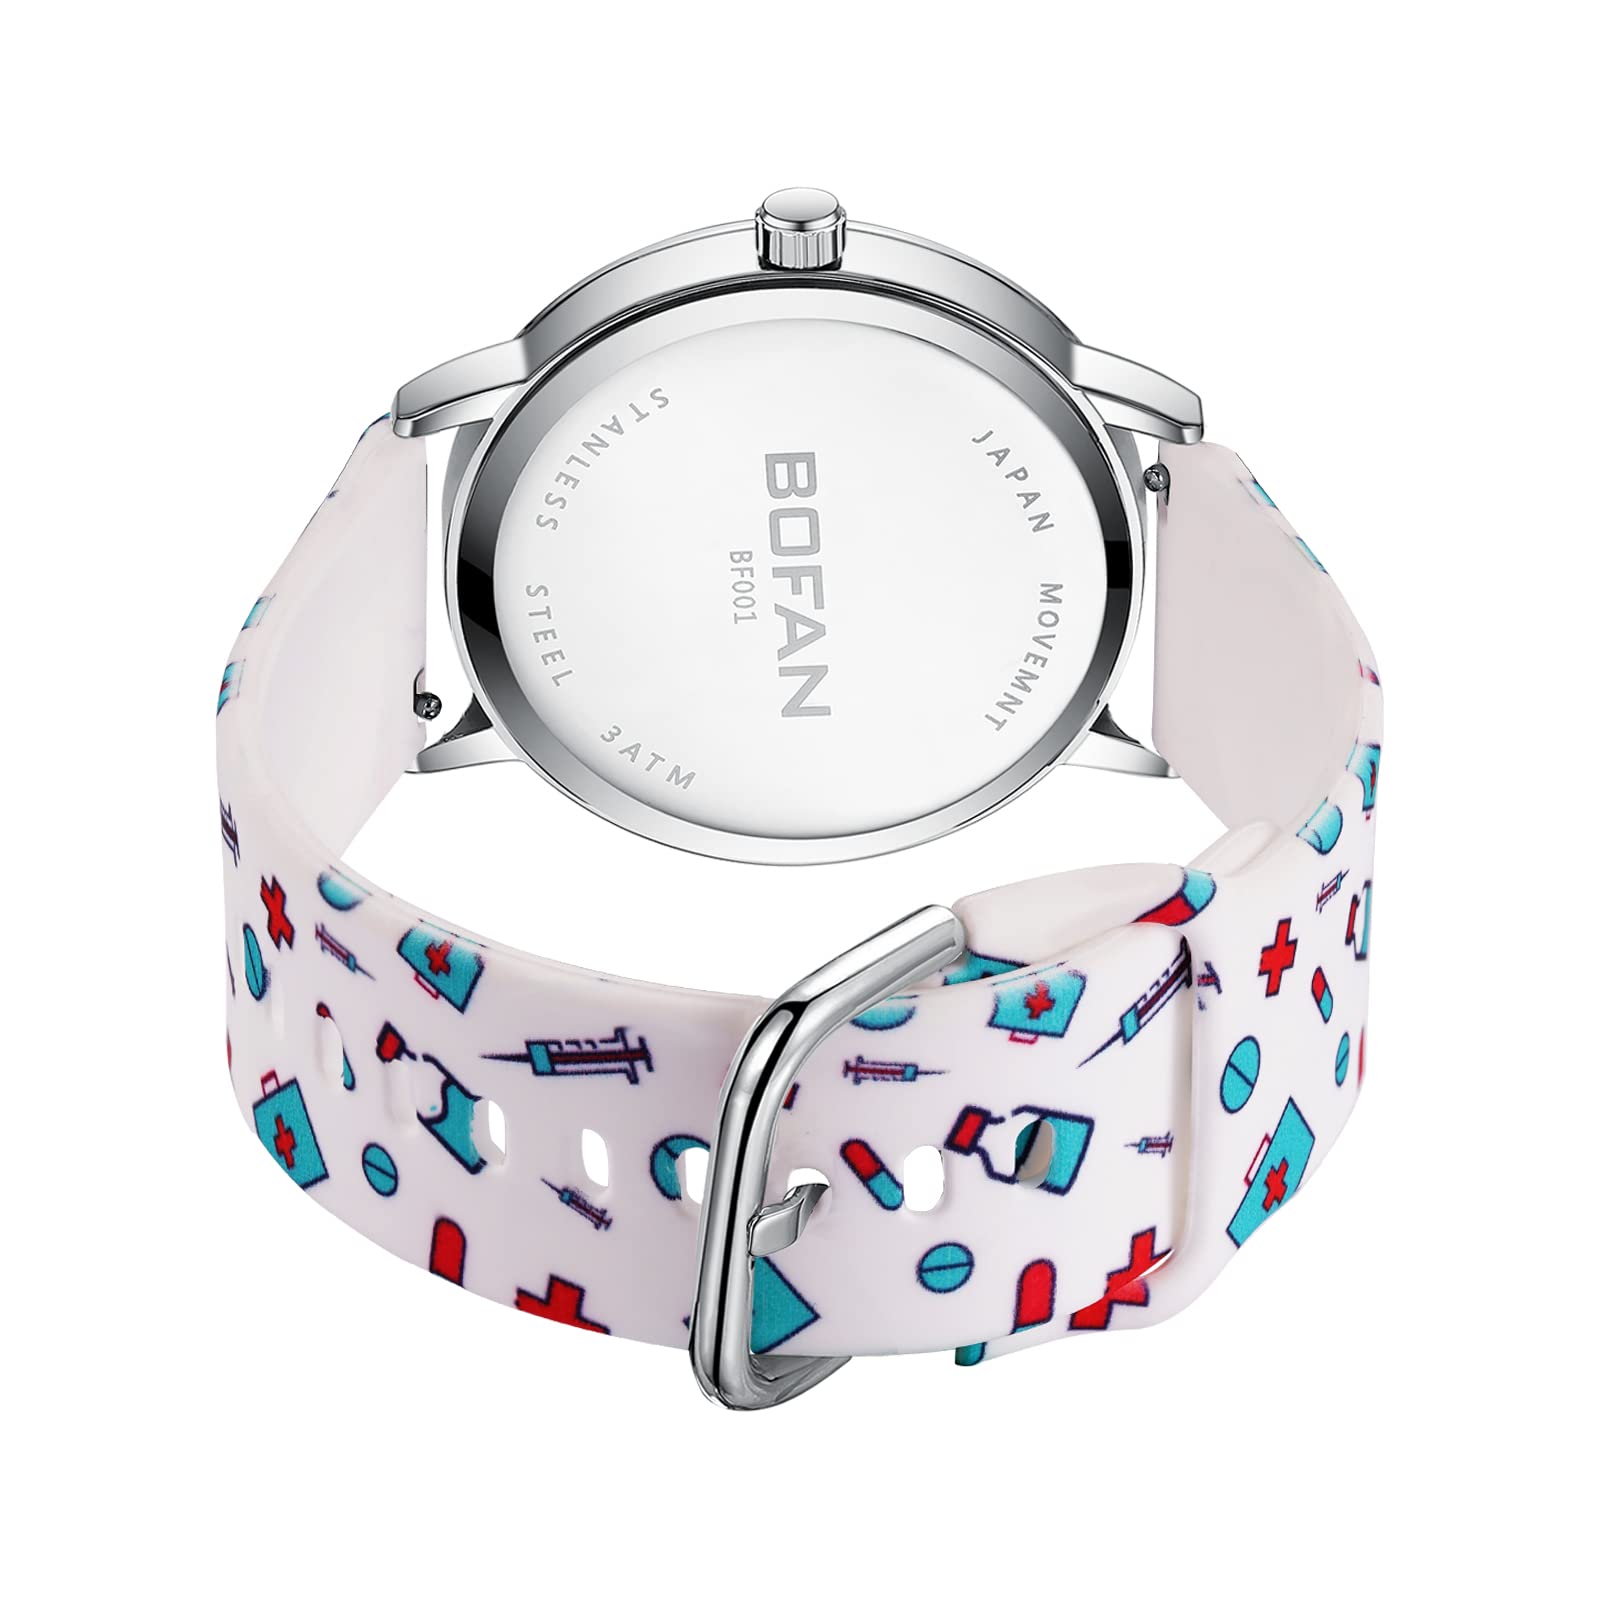 BOFAN Nurse Watch for Nurse,Medical Professionals,Students,Doctors with Various Medical Scrub Colors,Easy to Read Dial,Second Hand and 24 Hour,Soft Comfort Print Silicone Band,Water Resistant.